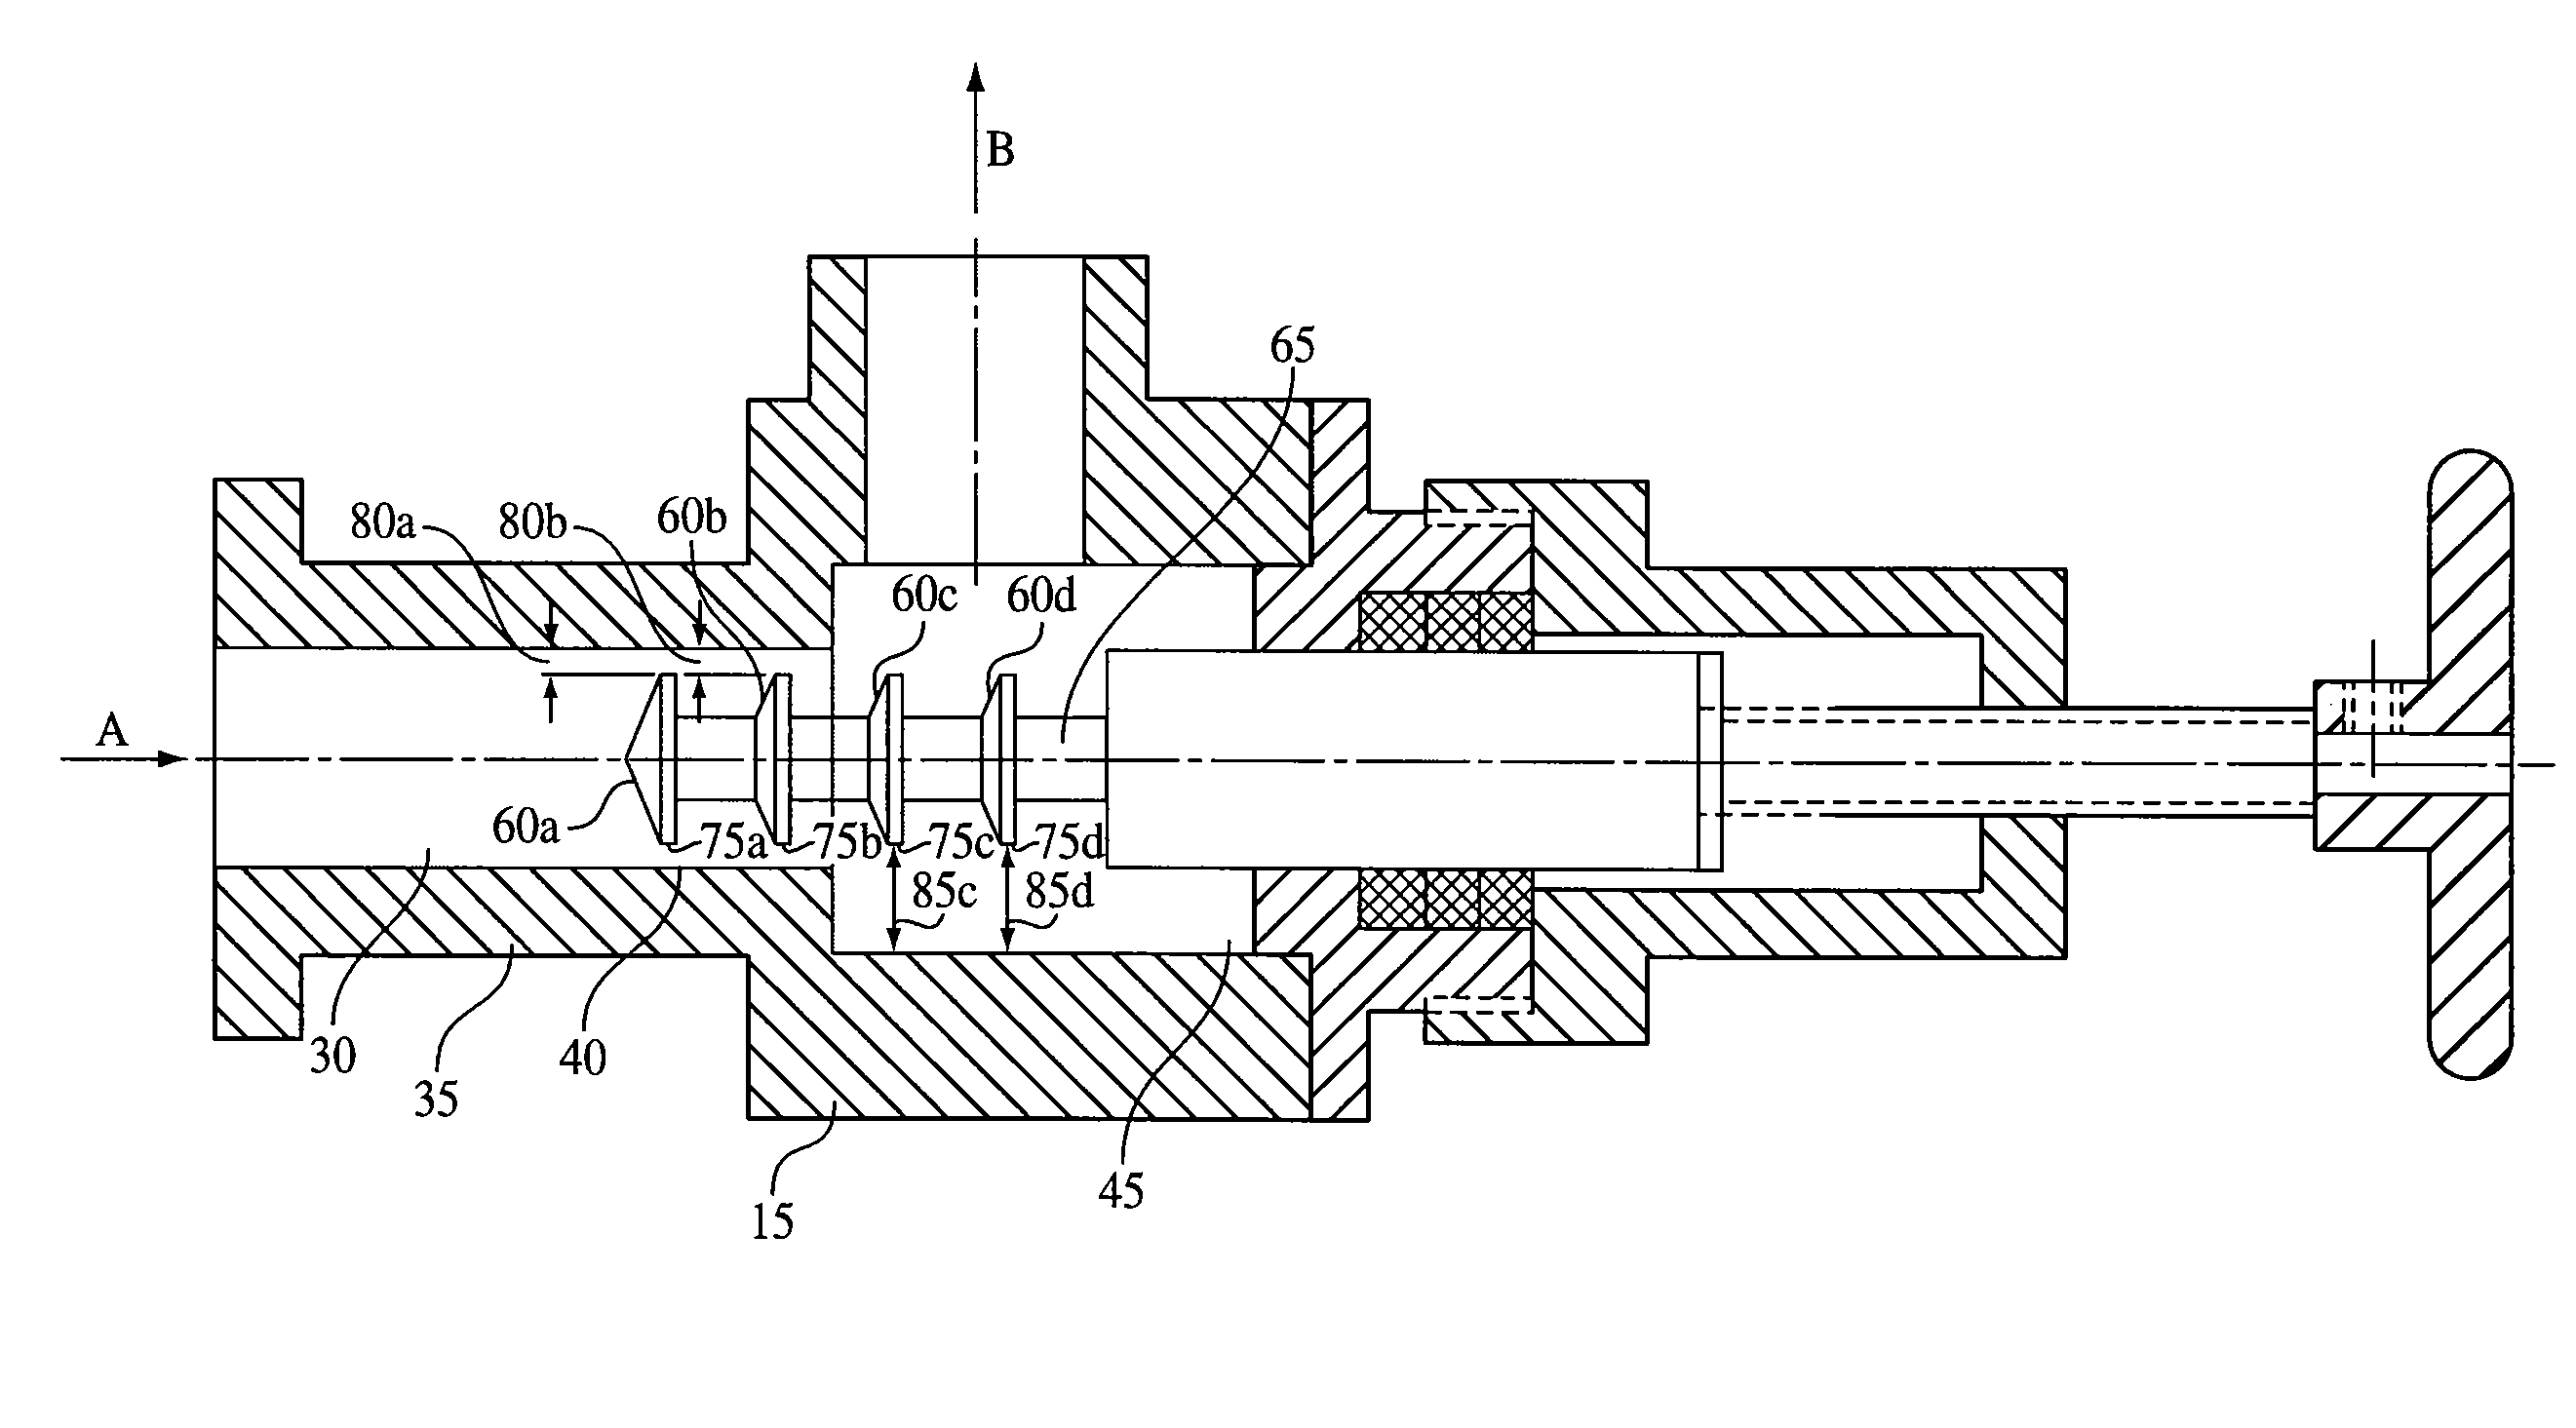 Device and method for creating hydrodynamic cavitation in fluids